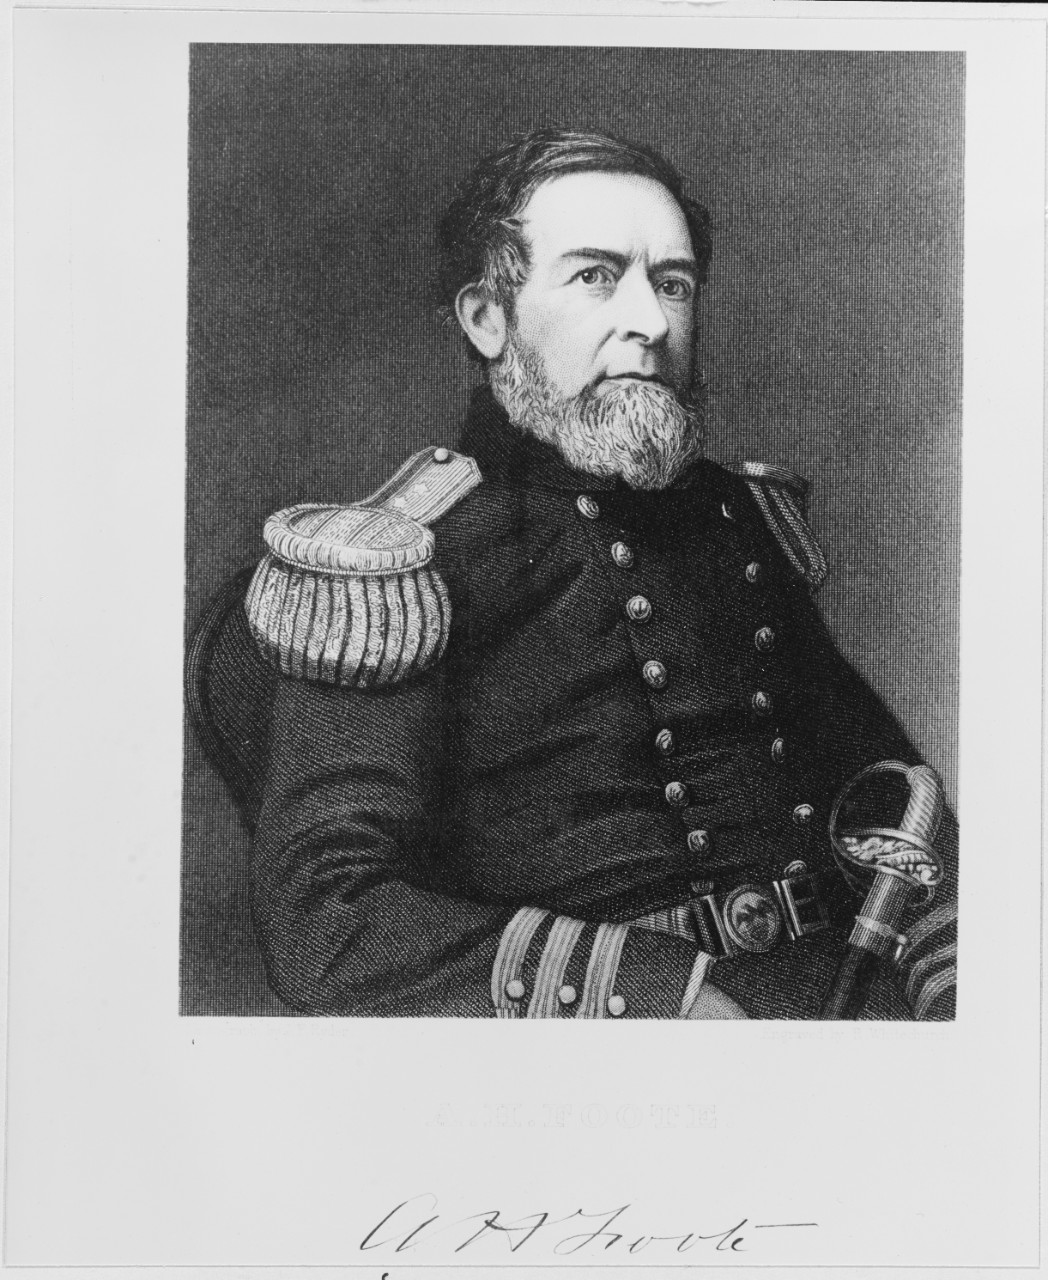 Captain Andrew H. Foote, USN